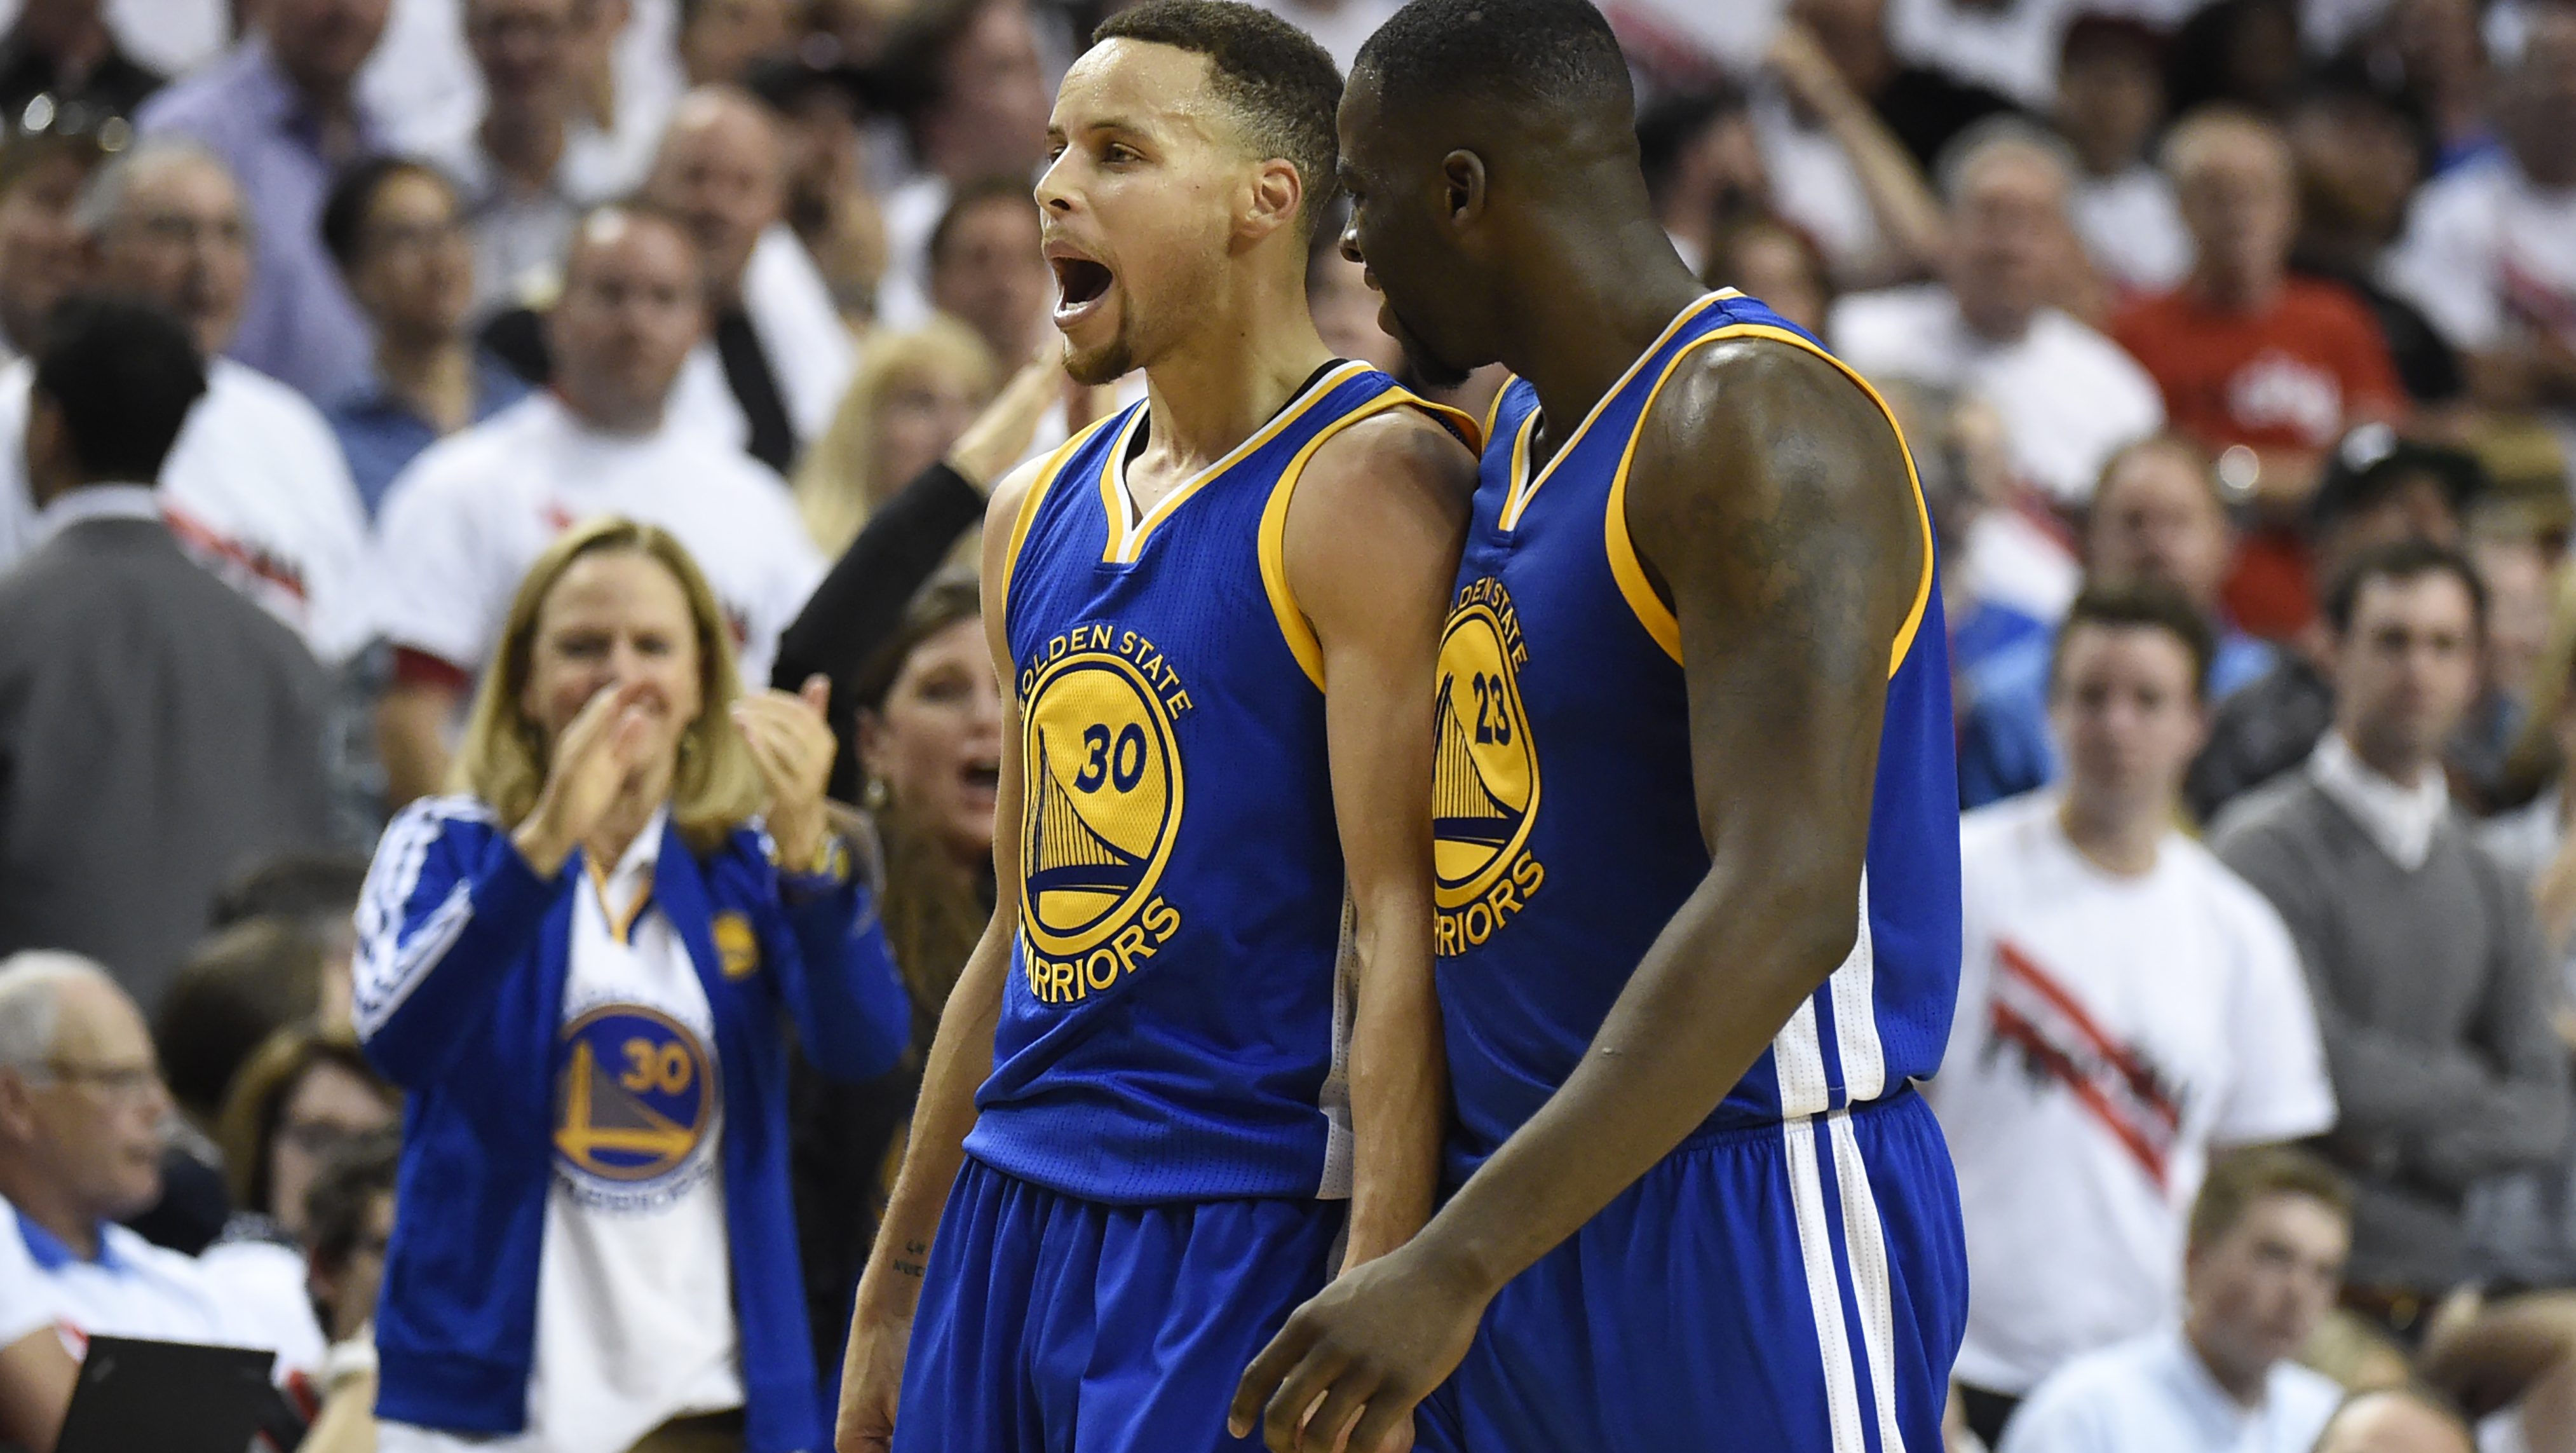 Blazers vs Warriors Live Stream How to Watch Game 5 Free